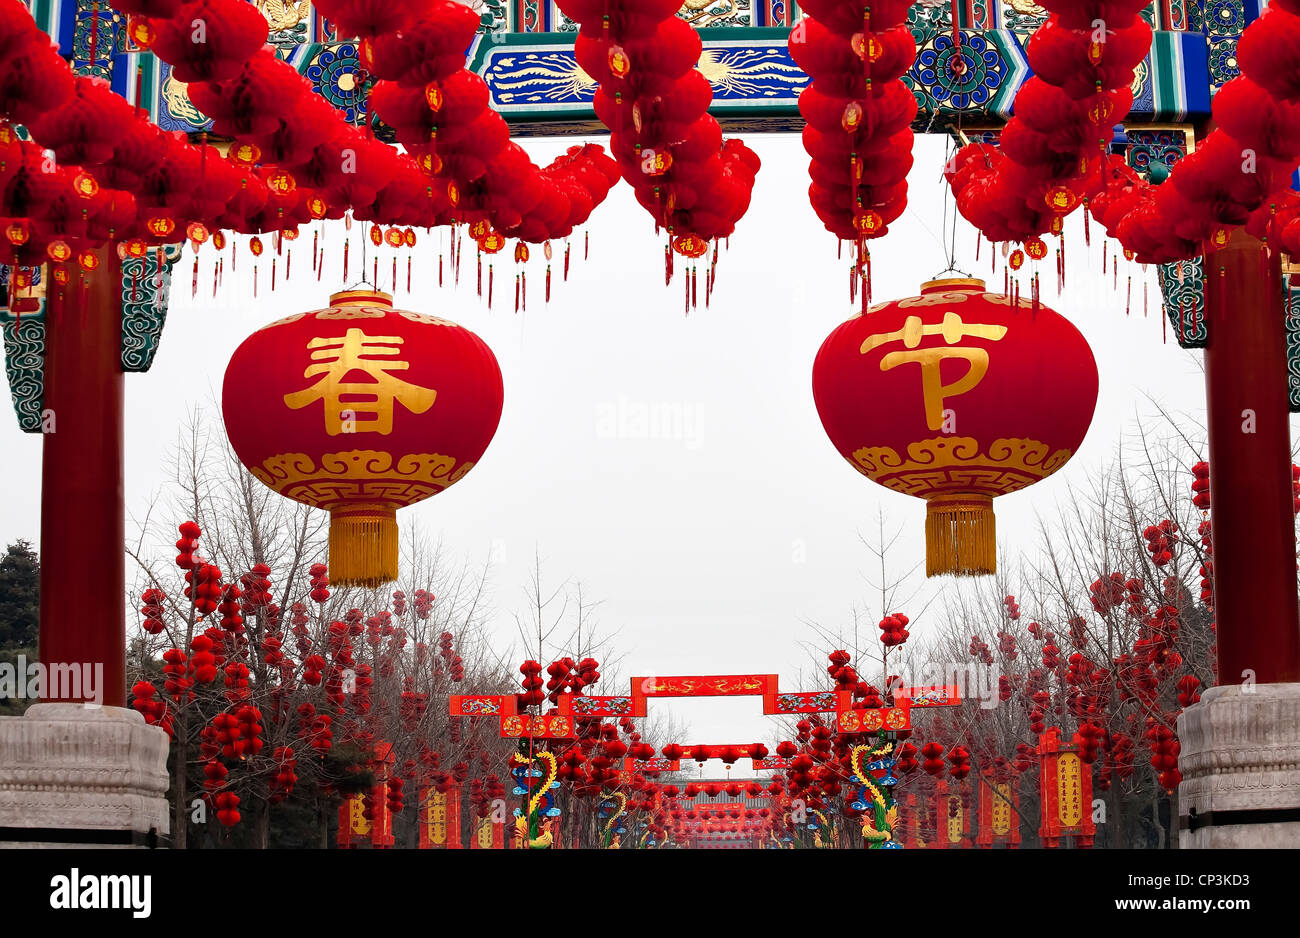 Large Spring Festival Red Lanterns Chinese Lunar New Year Decorations Gate Ditan Park, Beijing, China Stock Photo